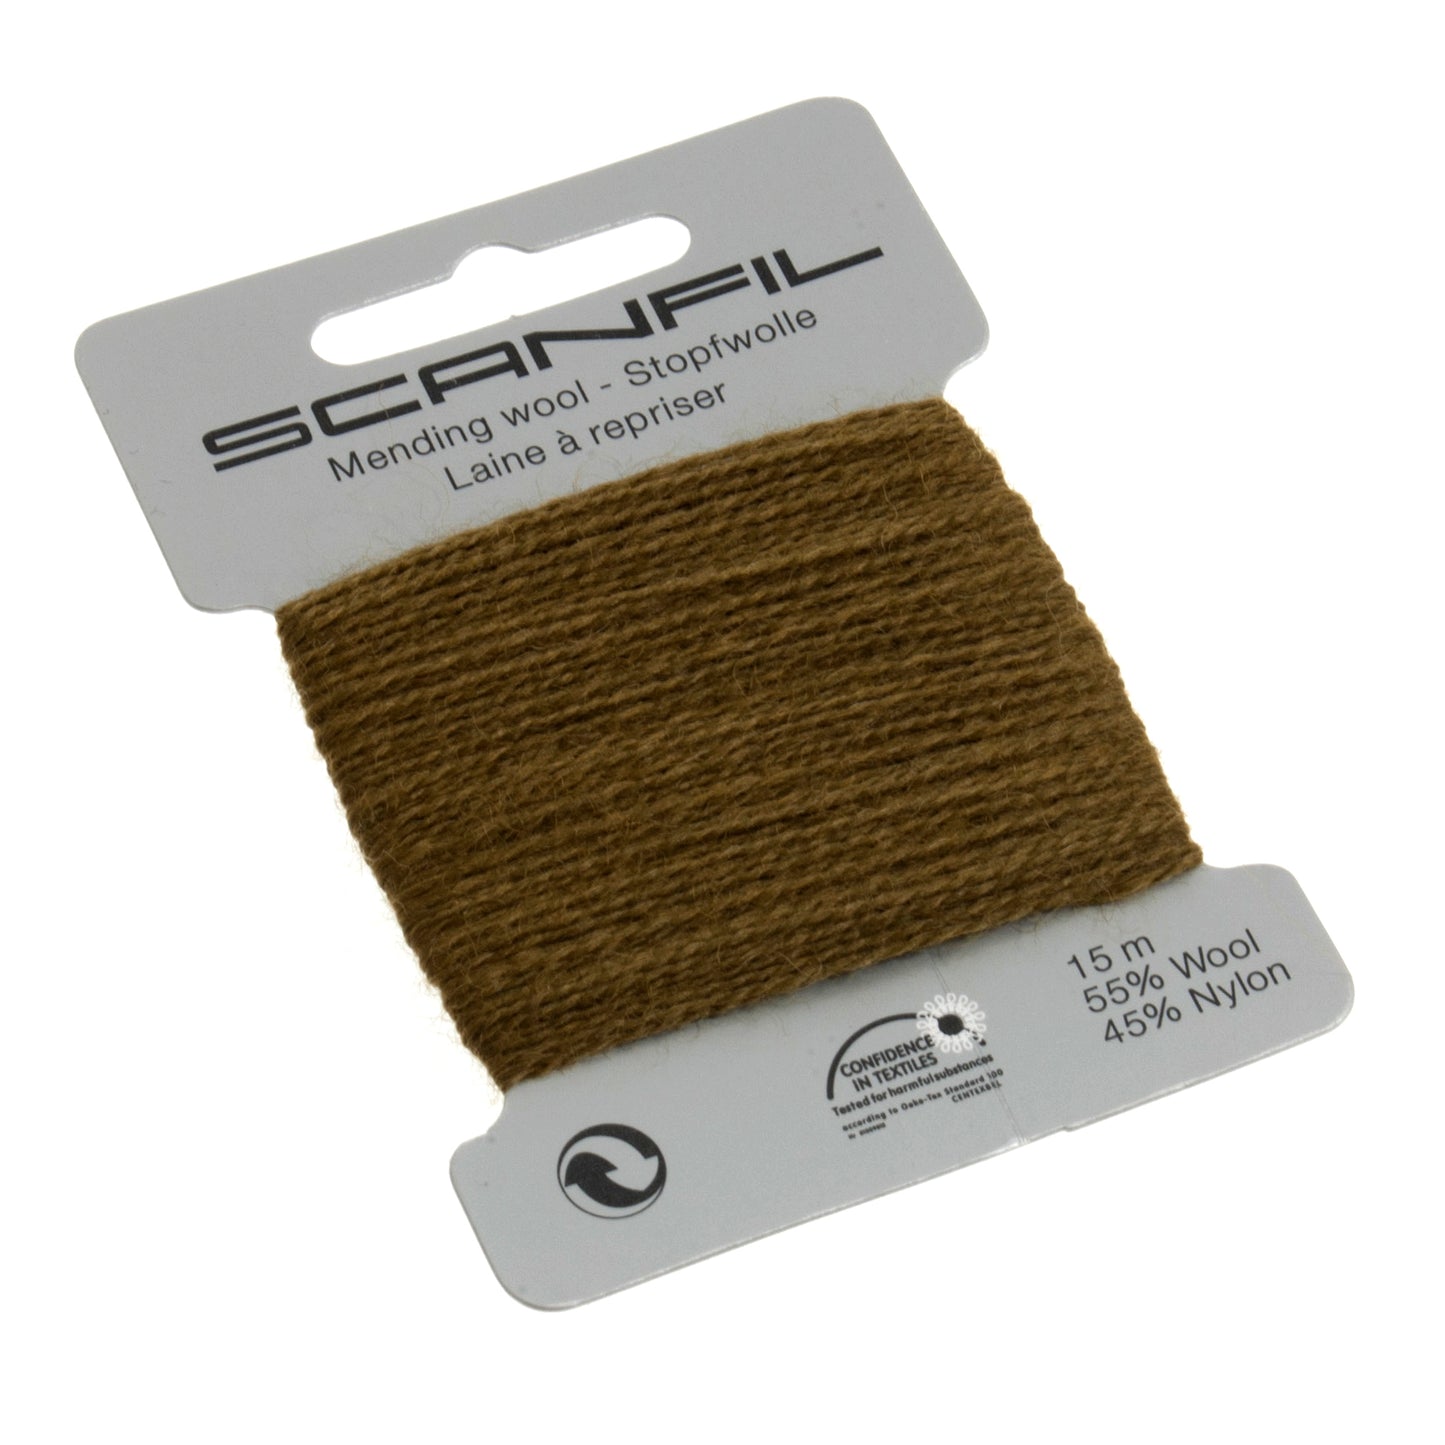 Scanfil - Mending Wool Thread - 15m - Col. 096 Olive